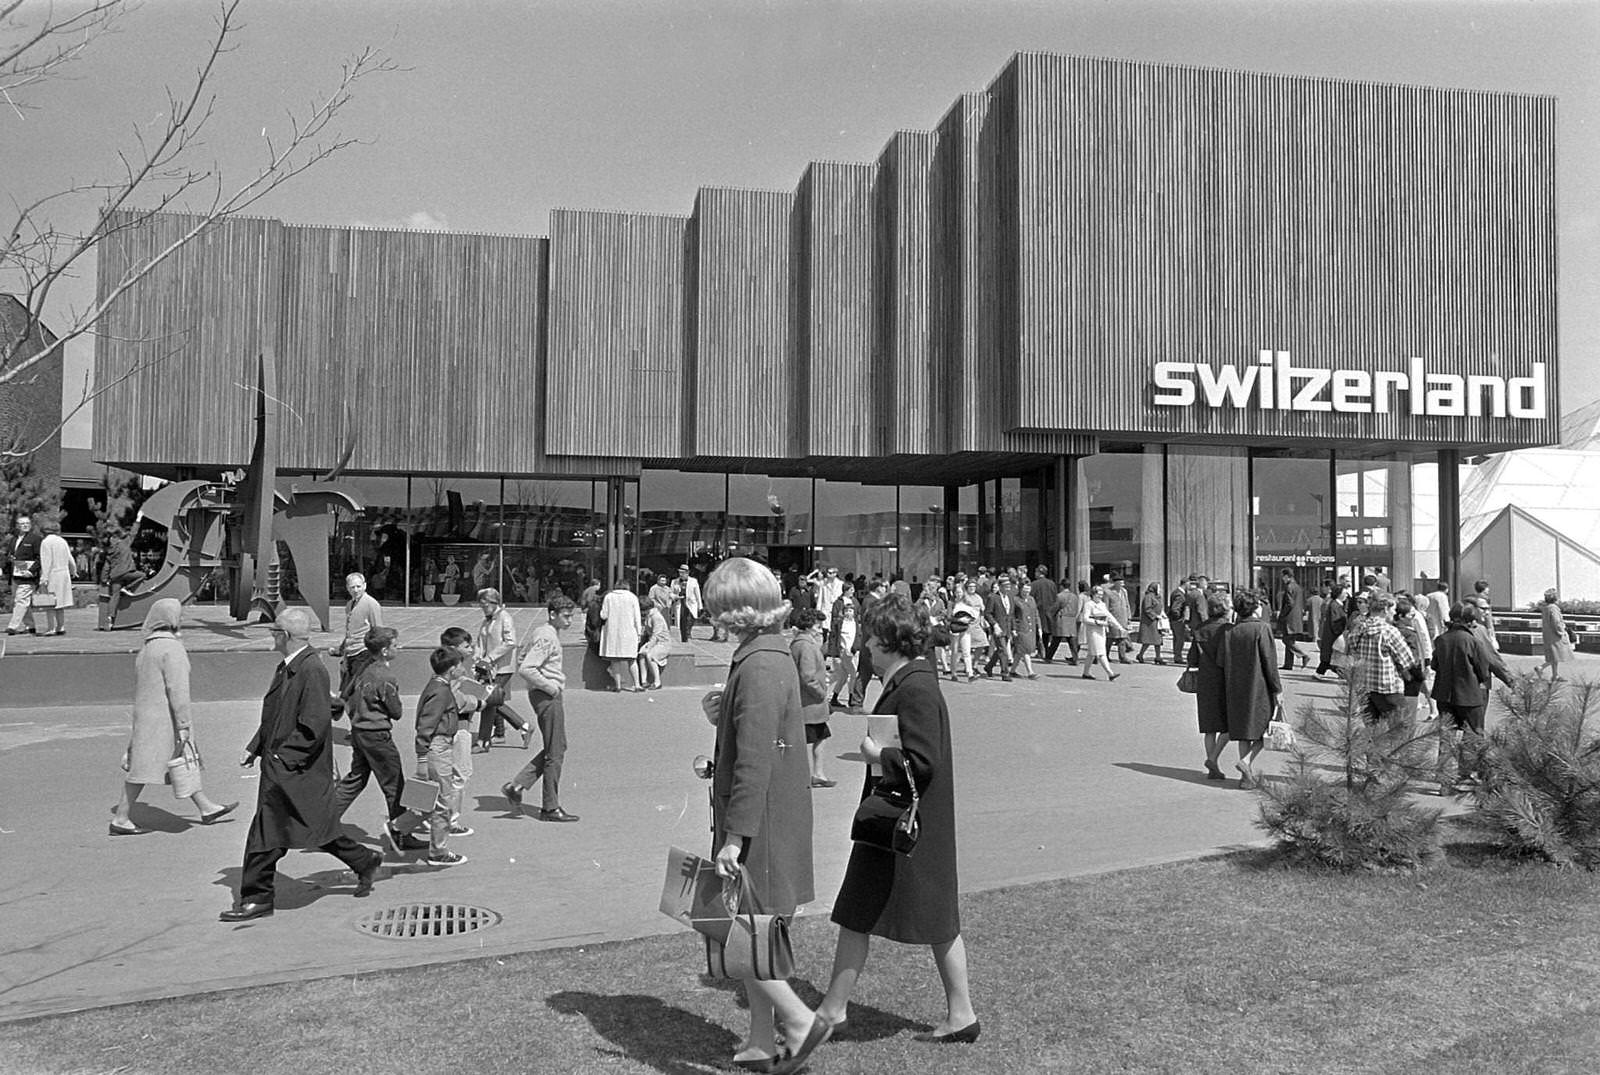 Swiss Pavilion at Expo 1967